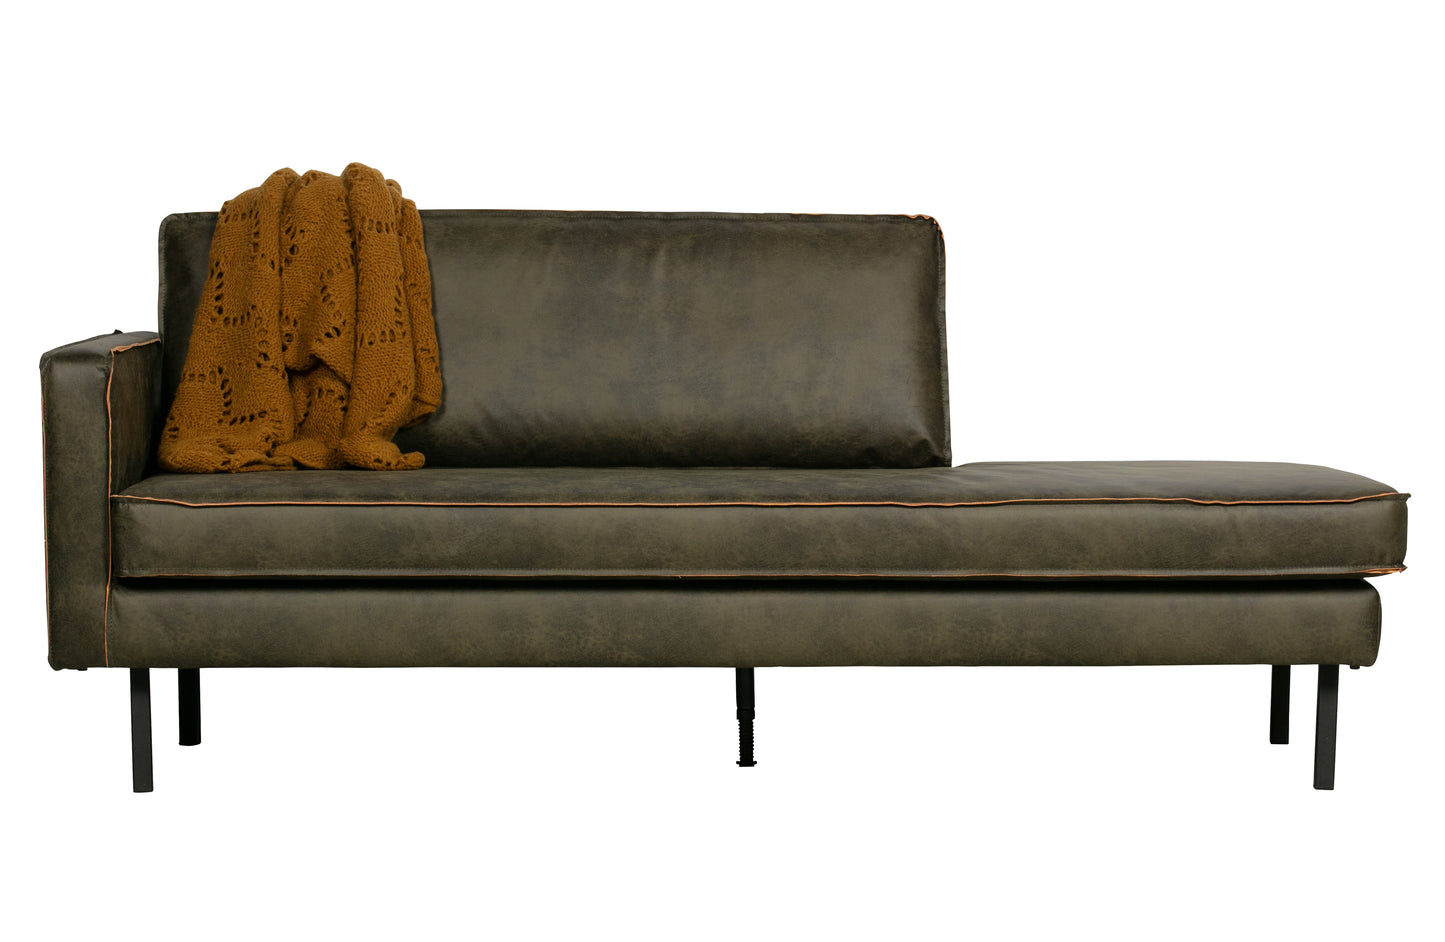 Rodeo - Daybed, Venstre, Army